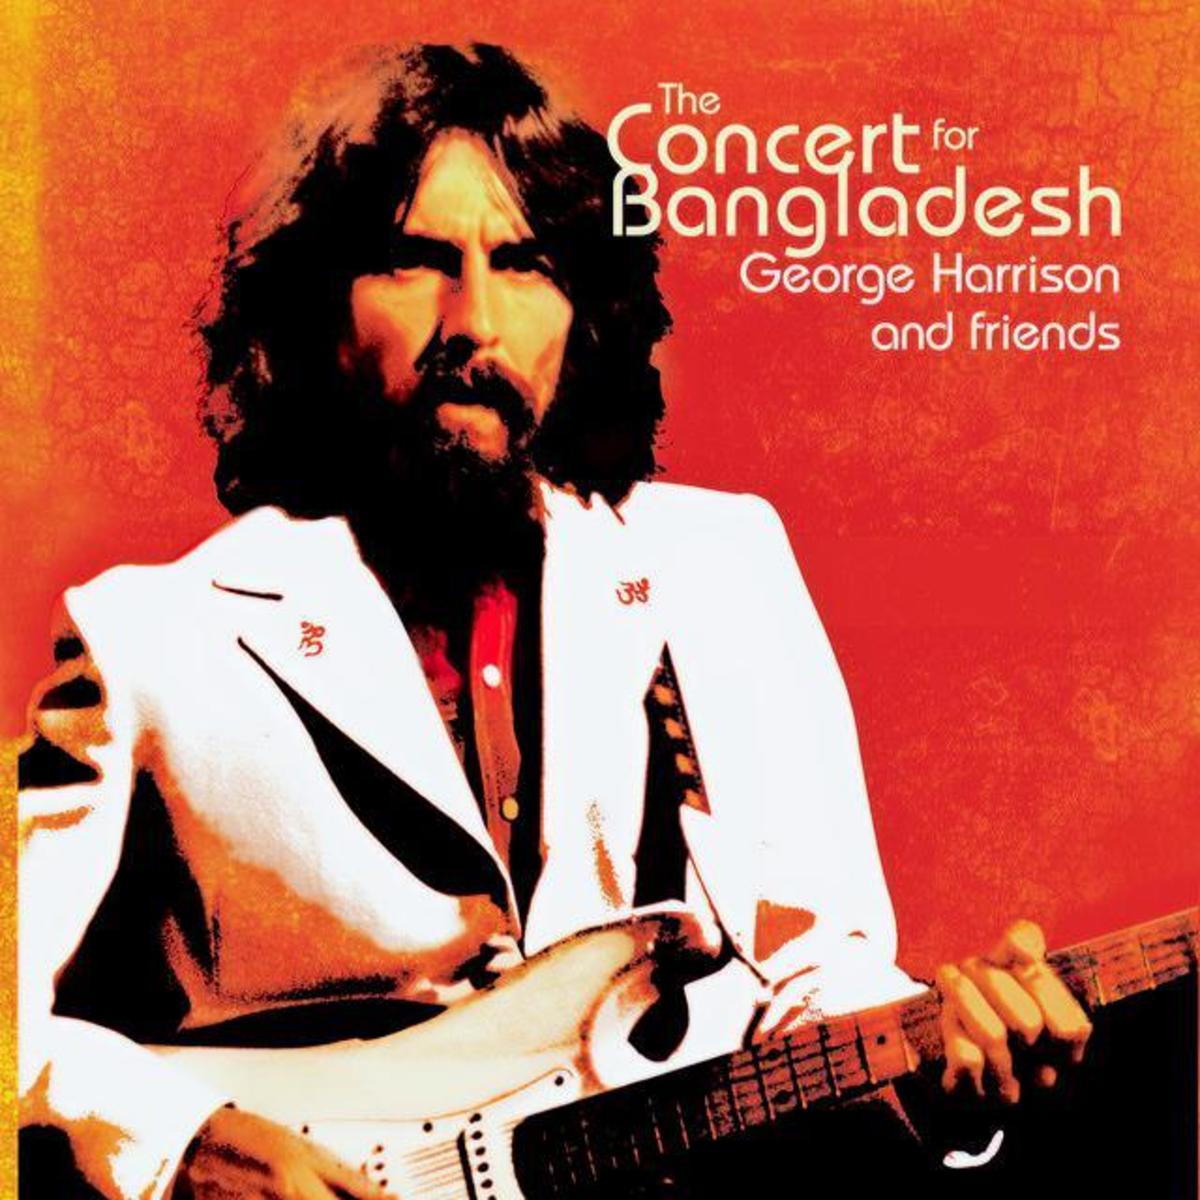 “The Concert for Bangladesh” and a Tribute to George Harrison, Ravi Shankar and Friends